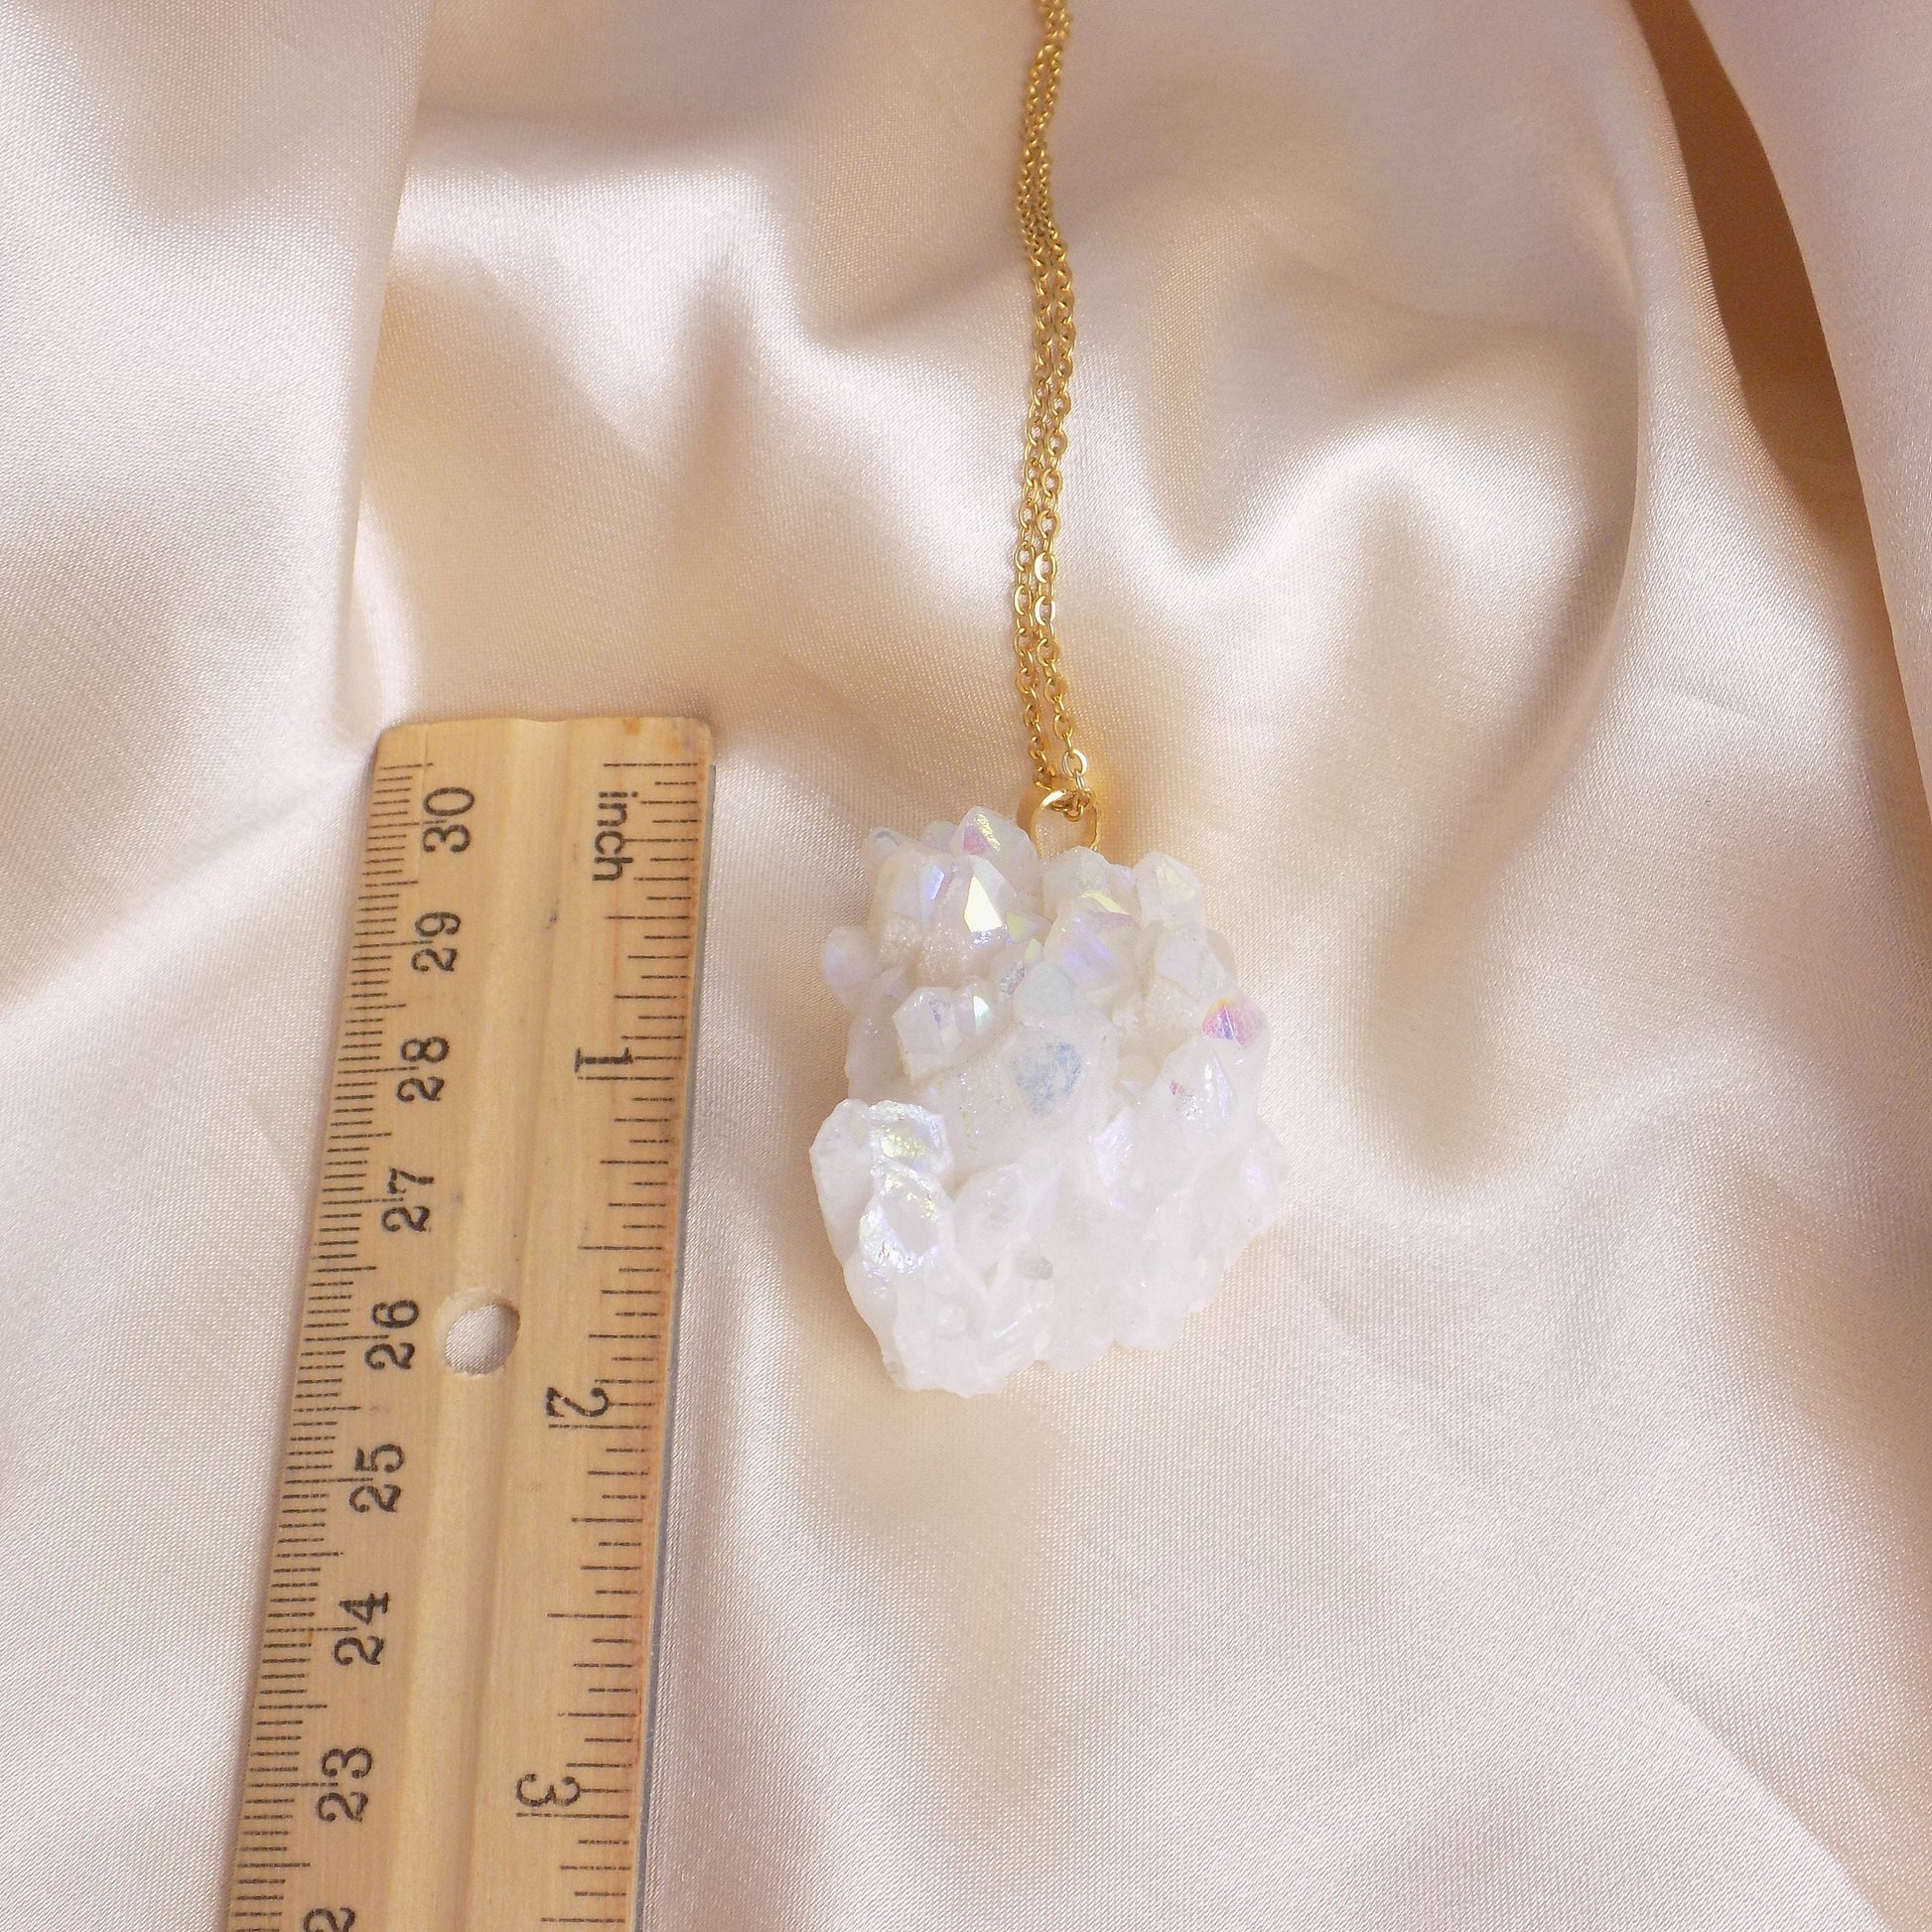 White Aura Quartz Necklace, Sparkly Extra Large Druzy Pendant Necklace Gold, Gift For Her, M7-118